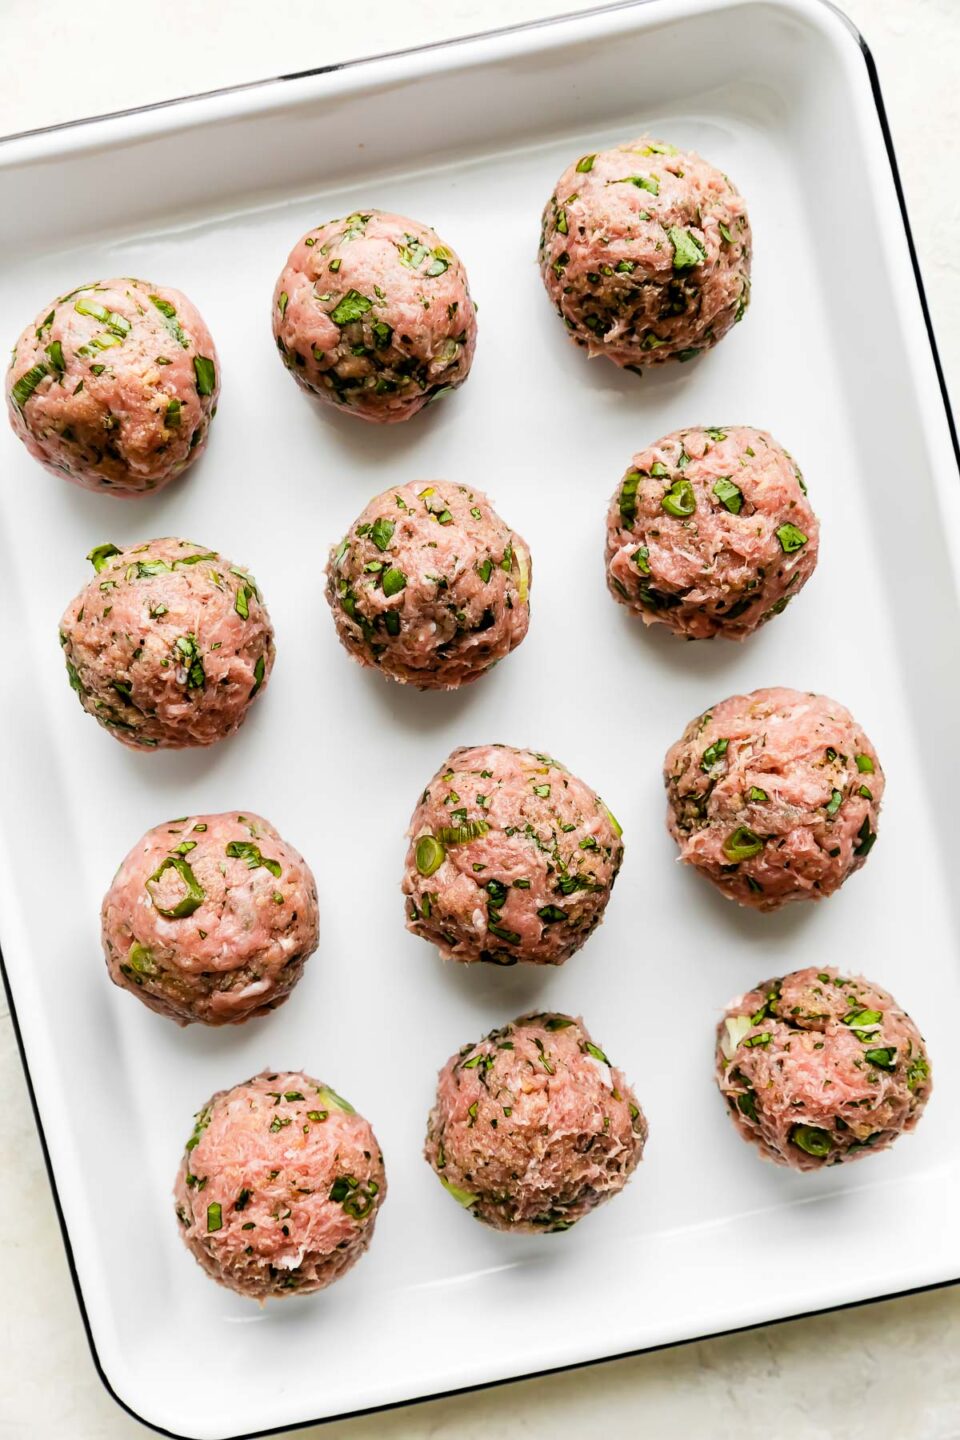 Twelve ground turkey or chicken curry meatballs are arranged atop a white ceramic baking dish. The baking dish sits atop a creamy white textured surface.